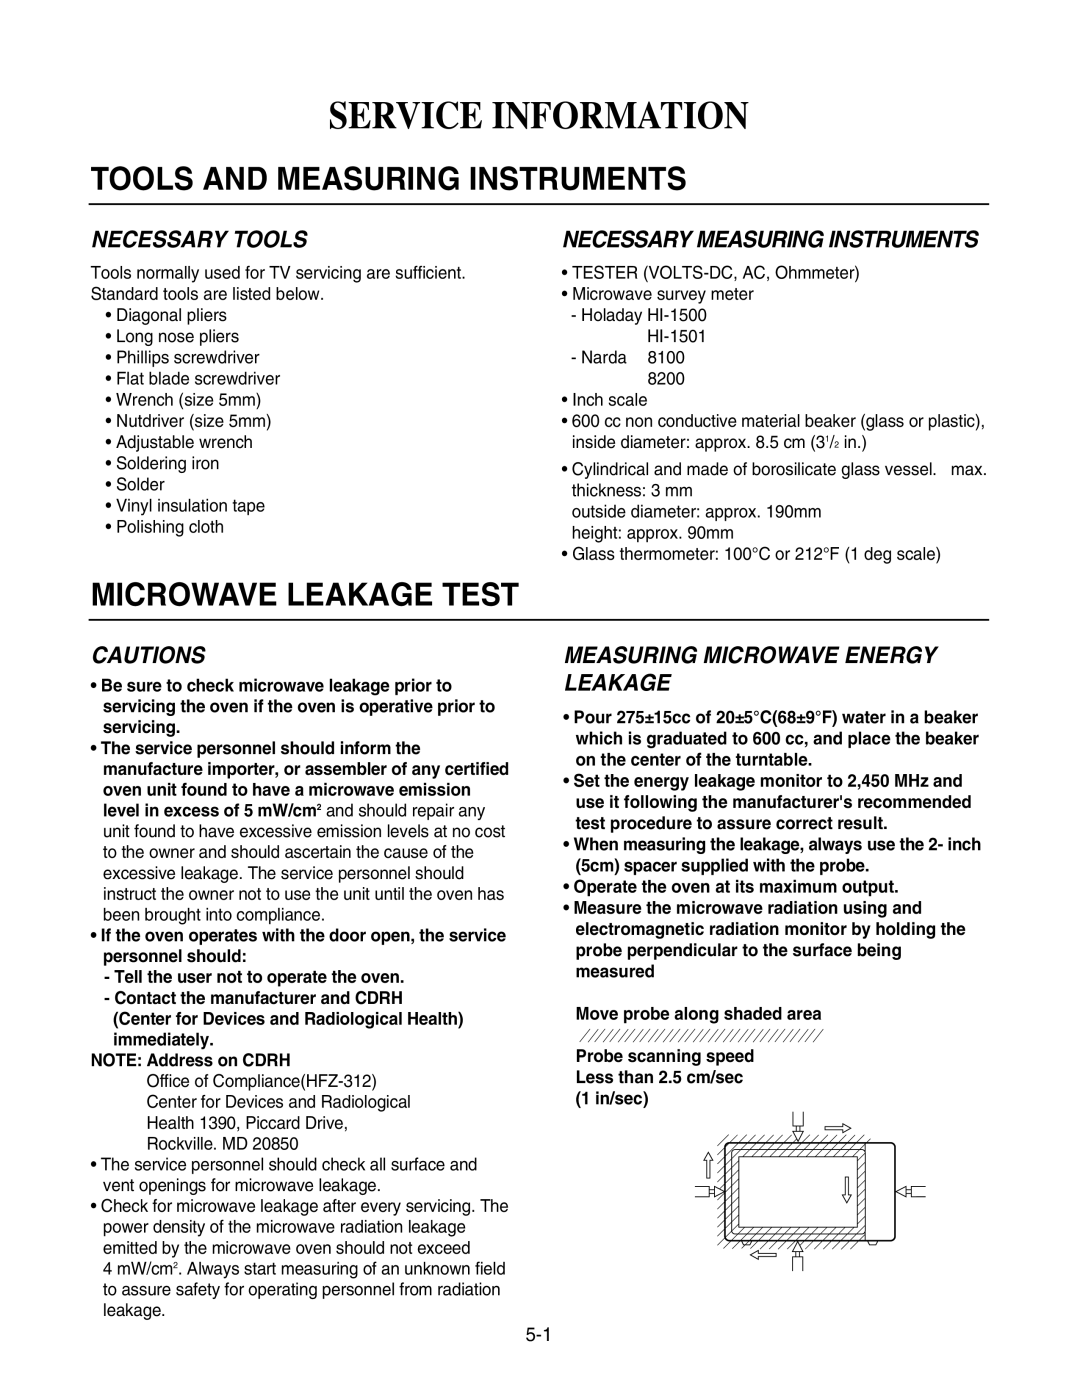 GE LMAB1240ST Service Information, Tools And Measuring Instruments, Microwave Leakage Test, Necessary Tools, Cautions 